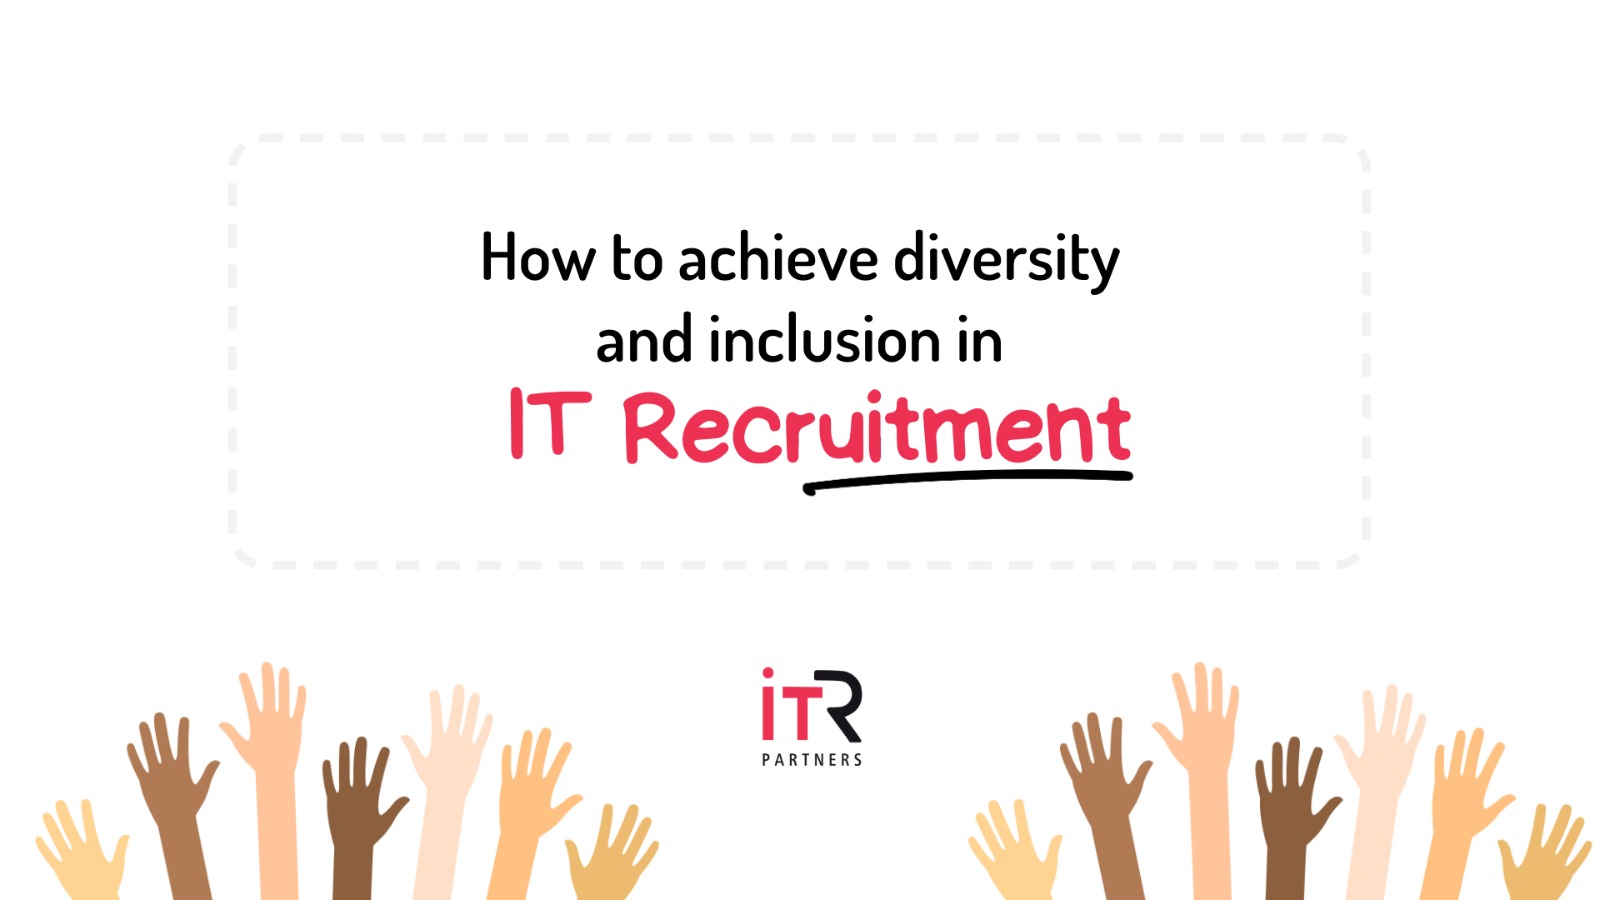 Diversity and inclusion in IT jobs